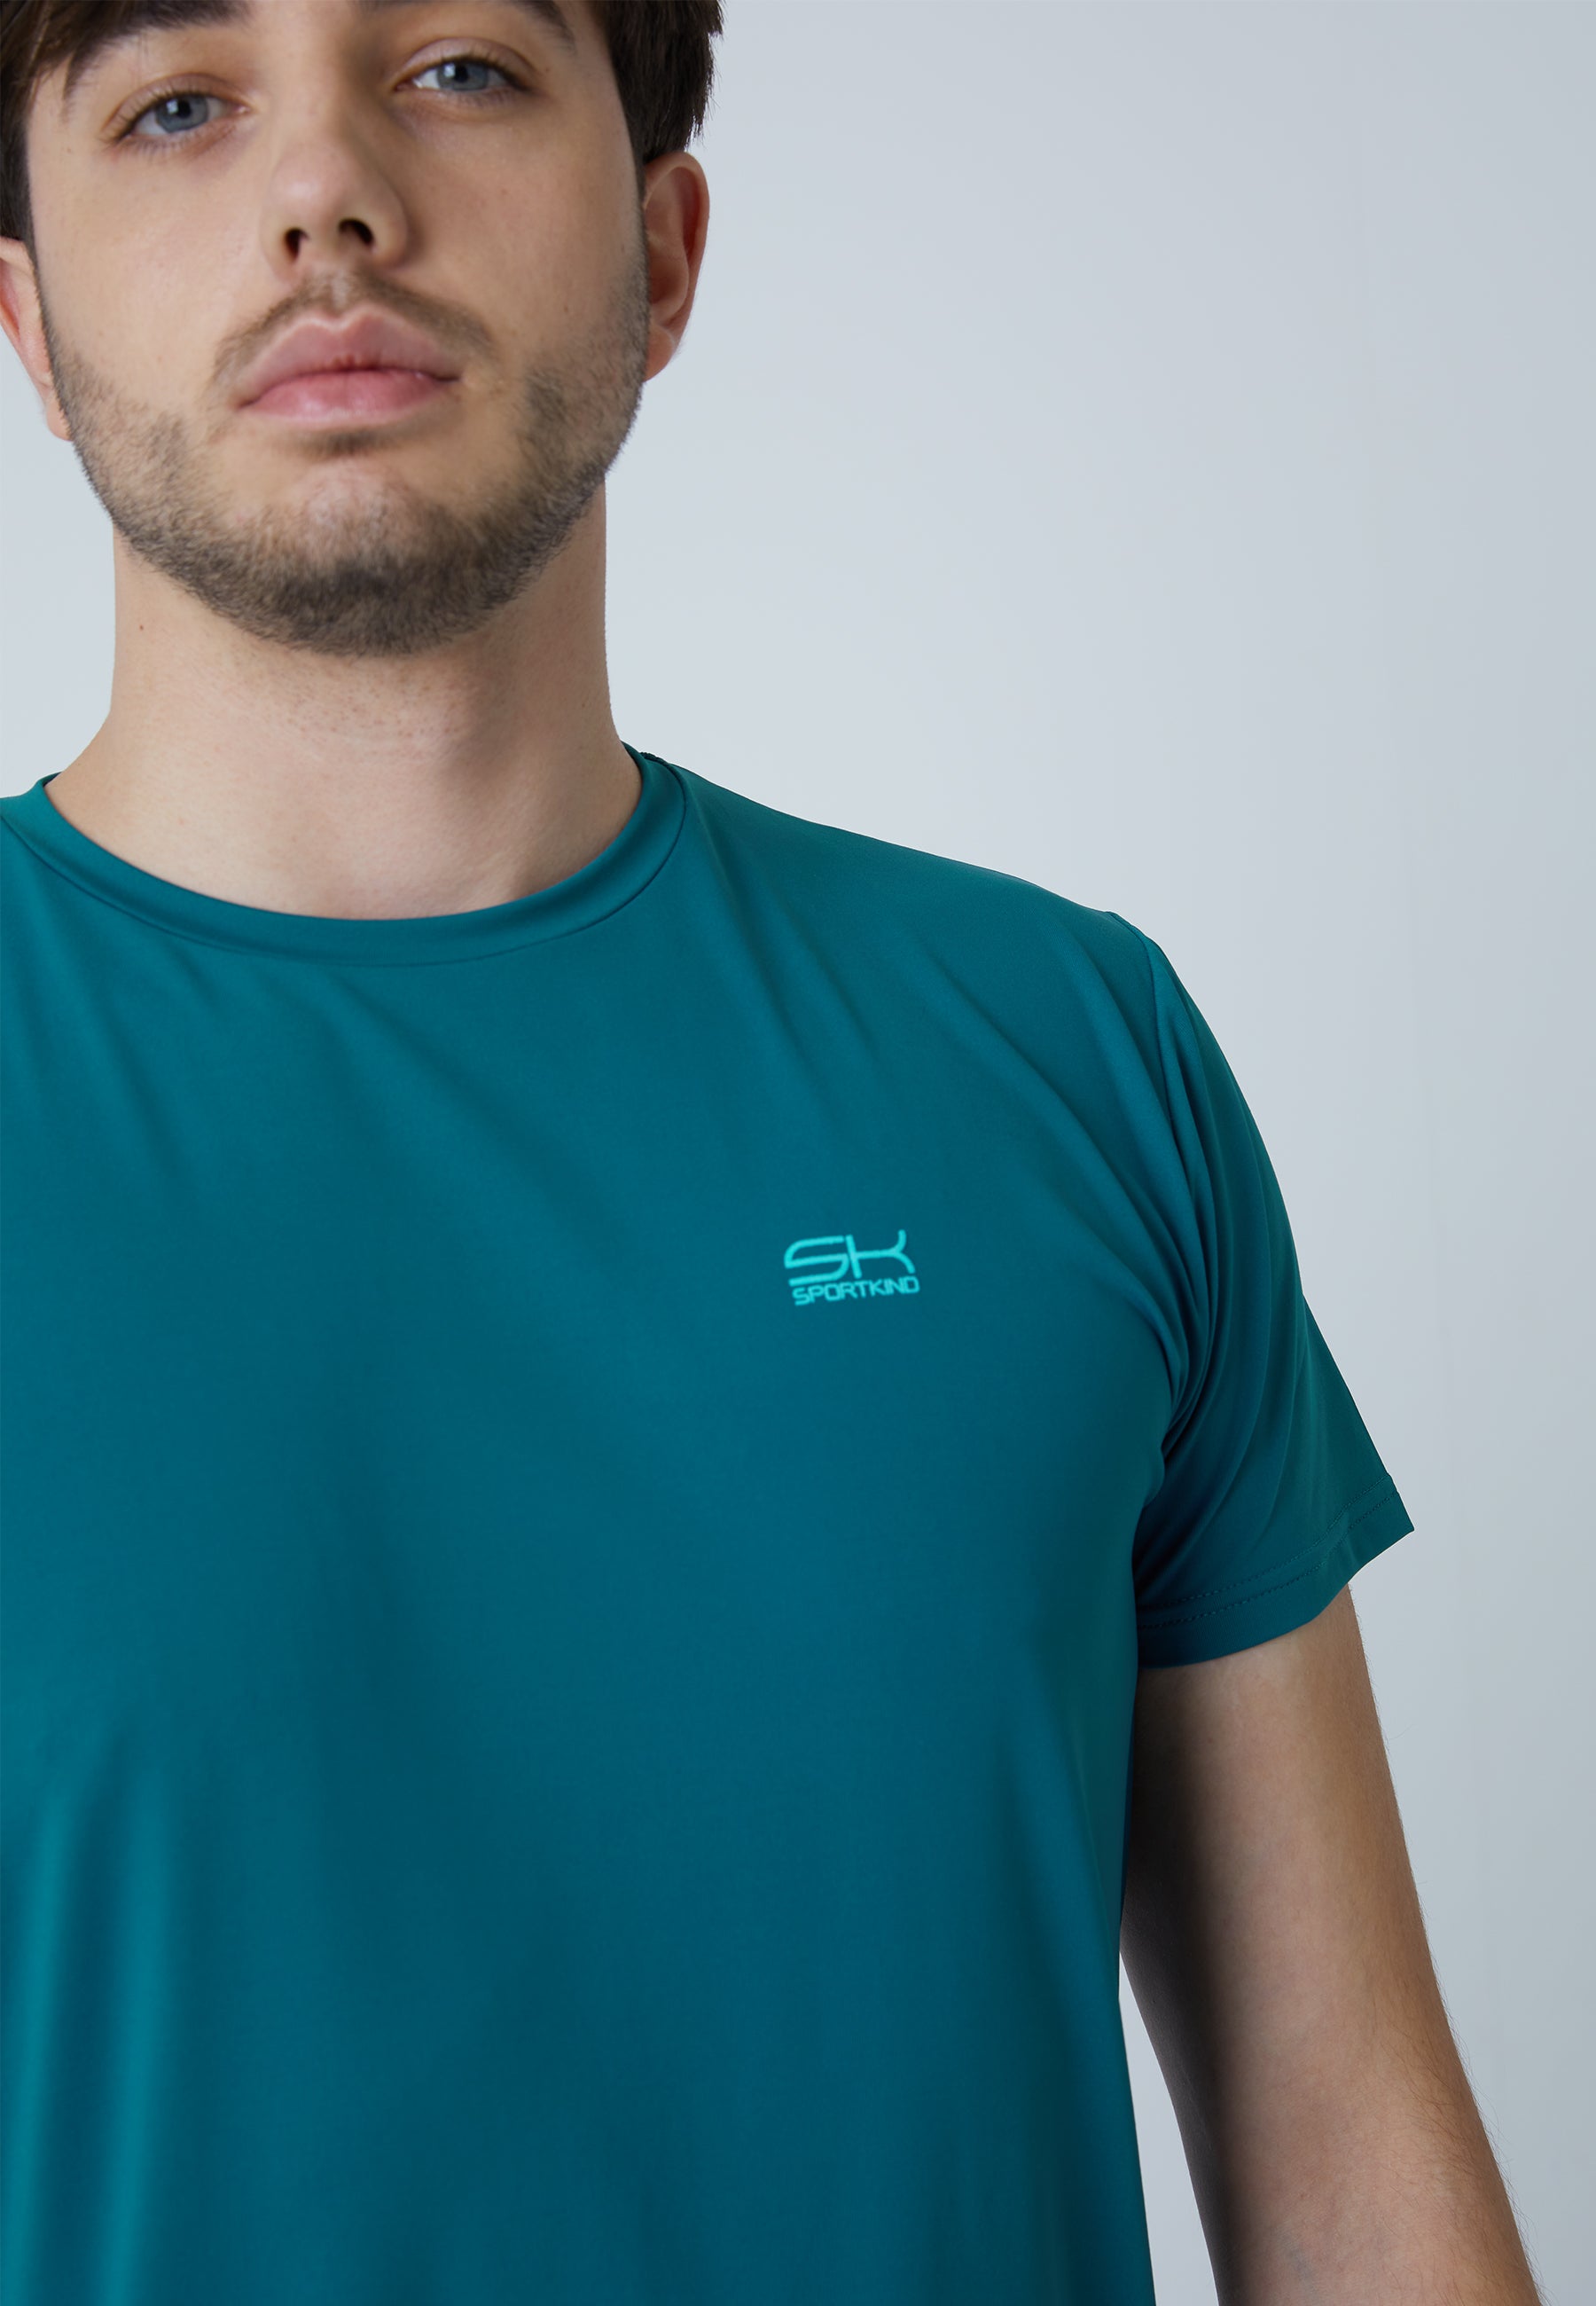 Tennis T-Shirt with crew neck, SPORTKIND